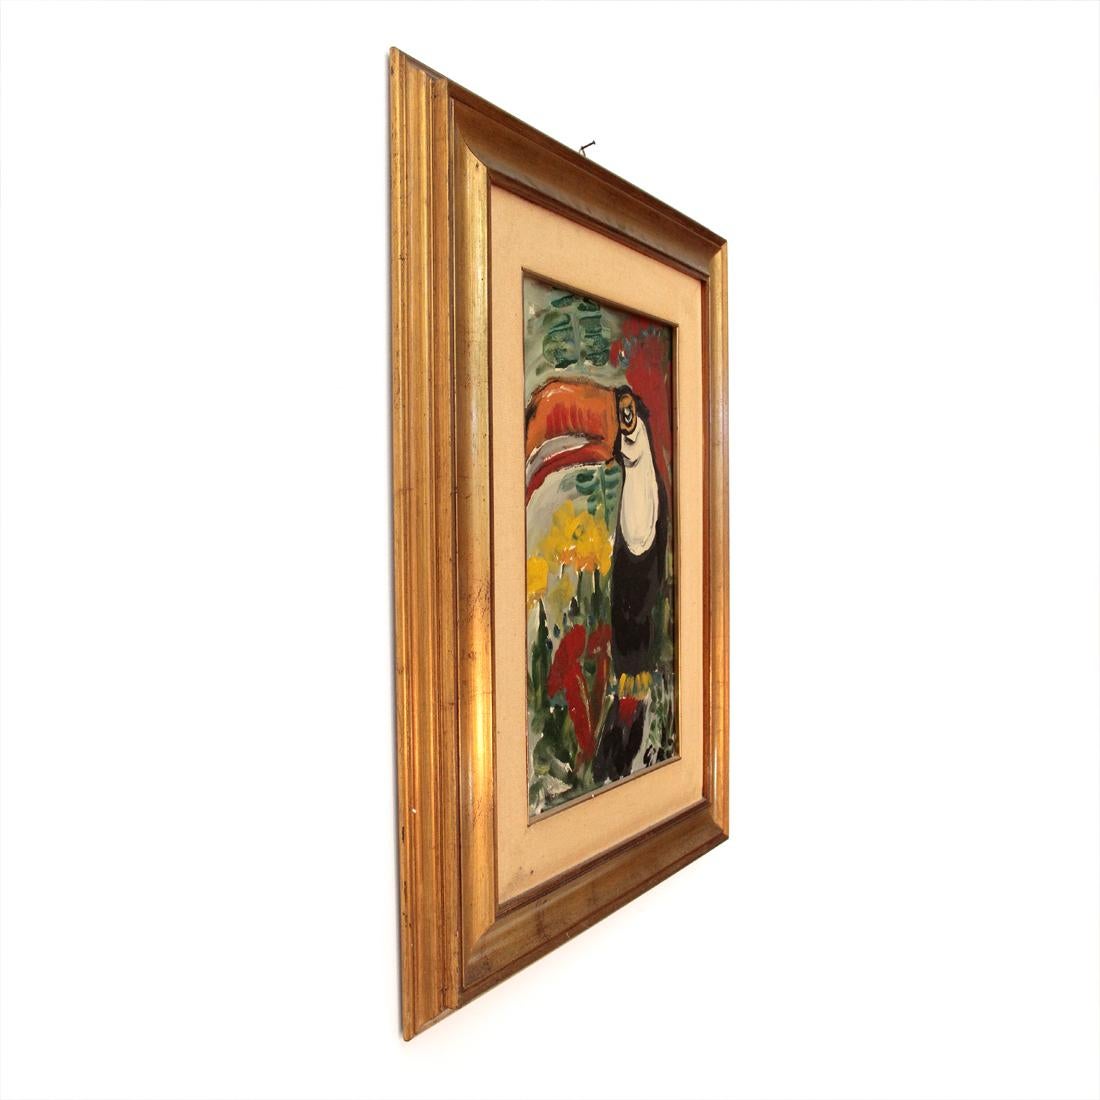 Oil painting executed by the painter Girò of Albisola in the 1960s.
Picture executed with oil paints on canvas depicting a toucan and flowers.
Good condition, some signs due to normal use over time.

Framework dimensions: Length 55 cm - Height